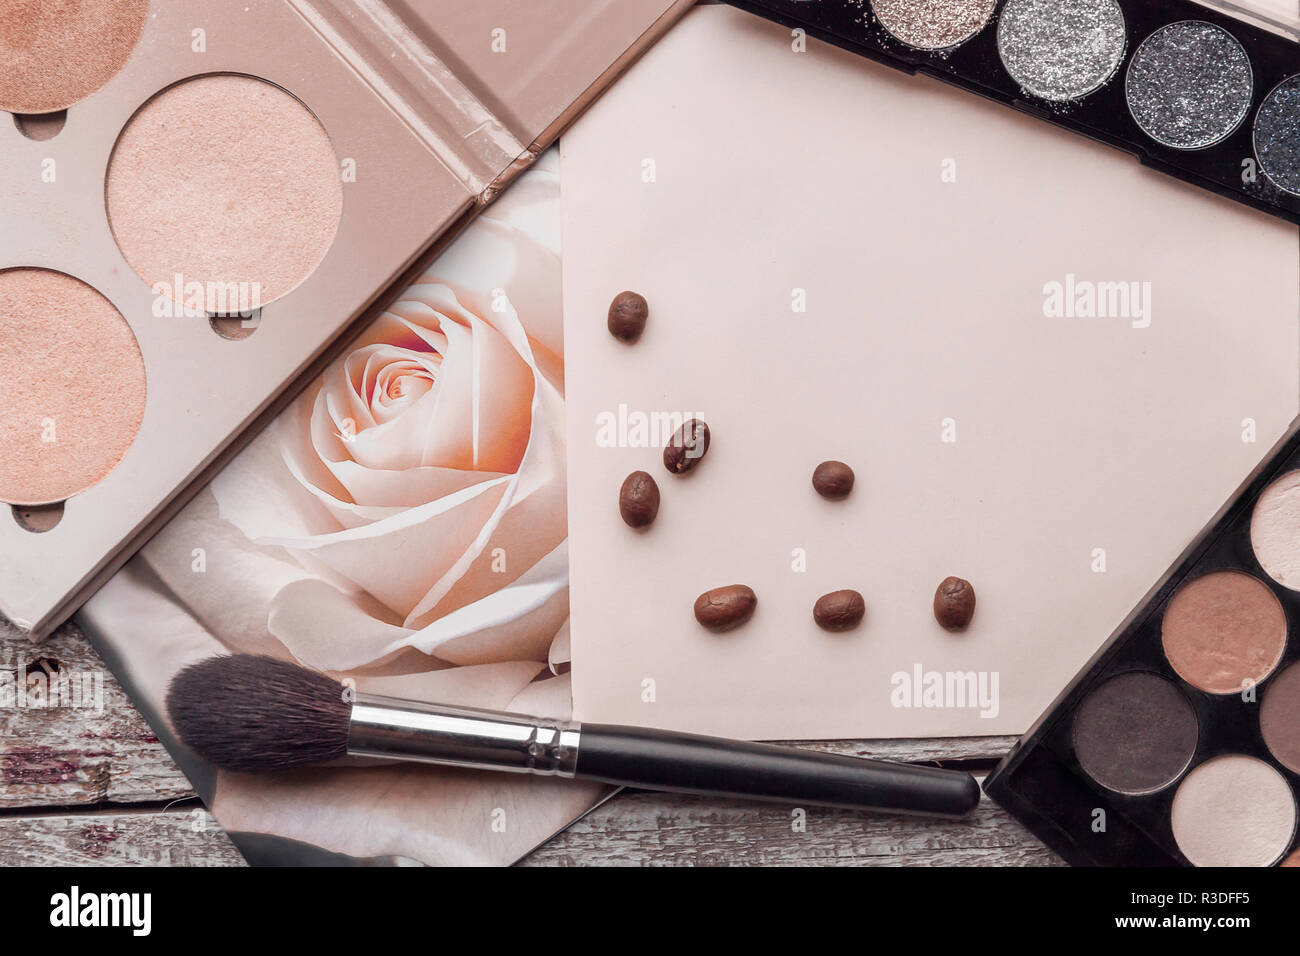 Image of cosmetic make up flat lay pink background copy space text beauty graphic content Stock Photo